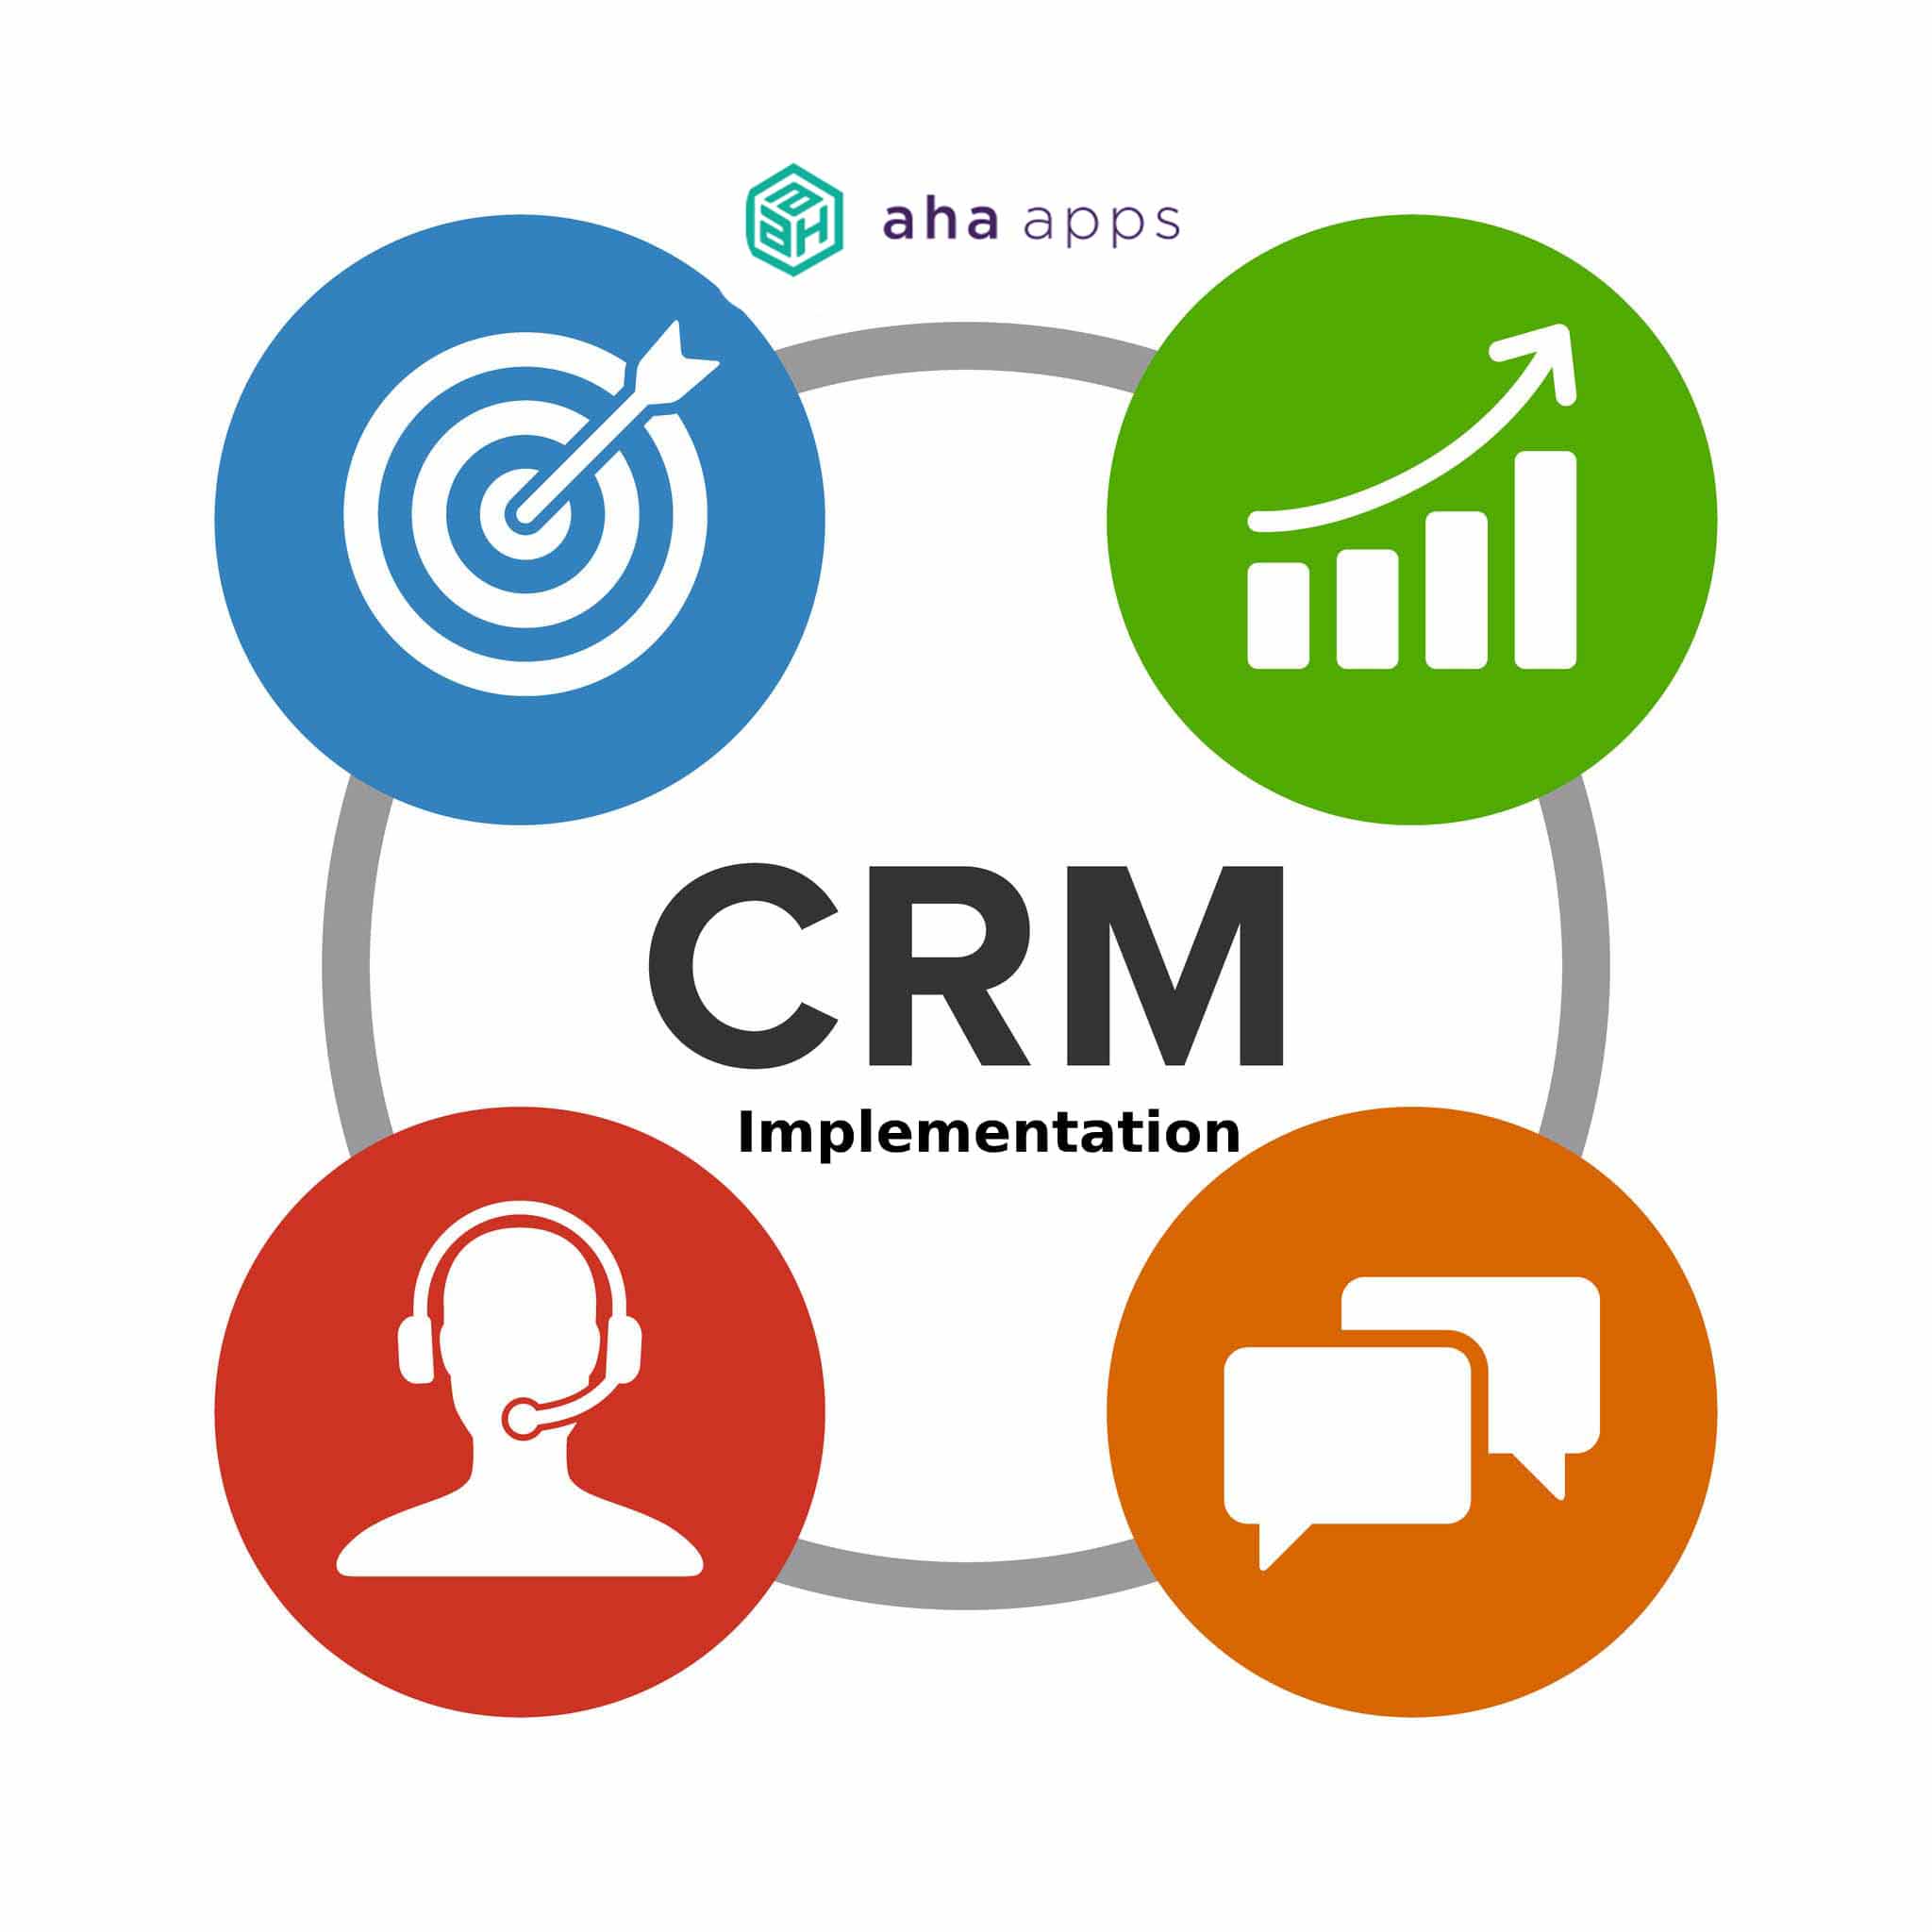 CRM Implementation - AhaApps